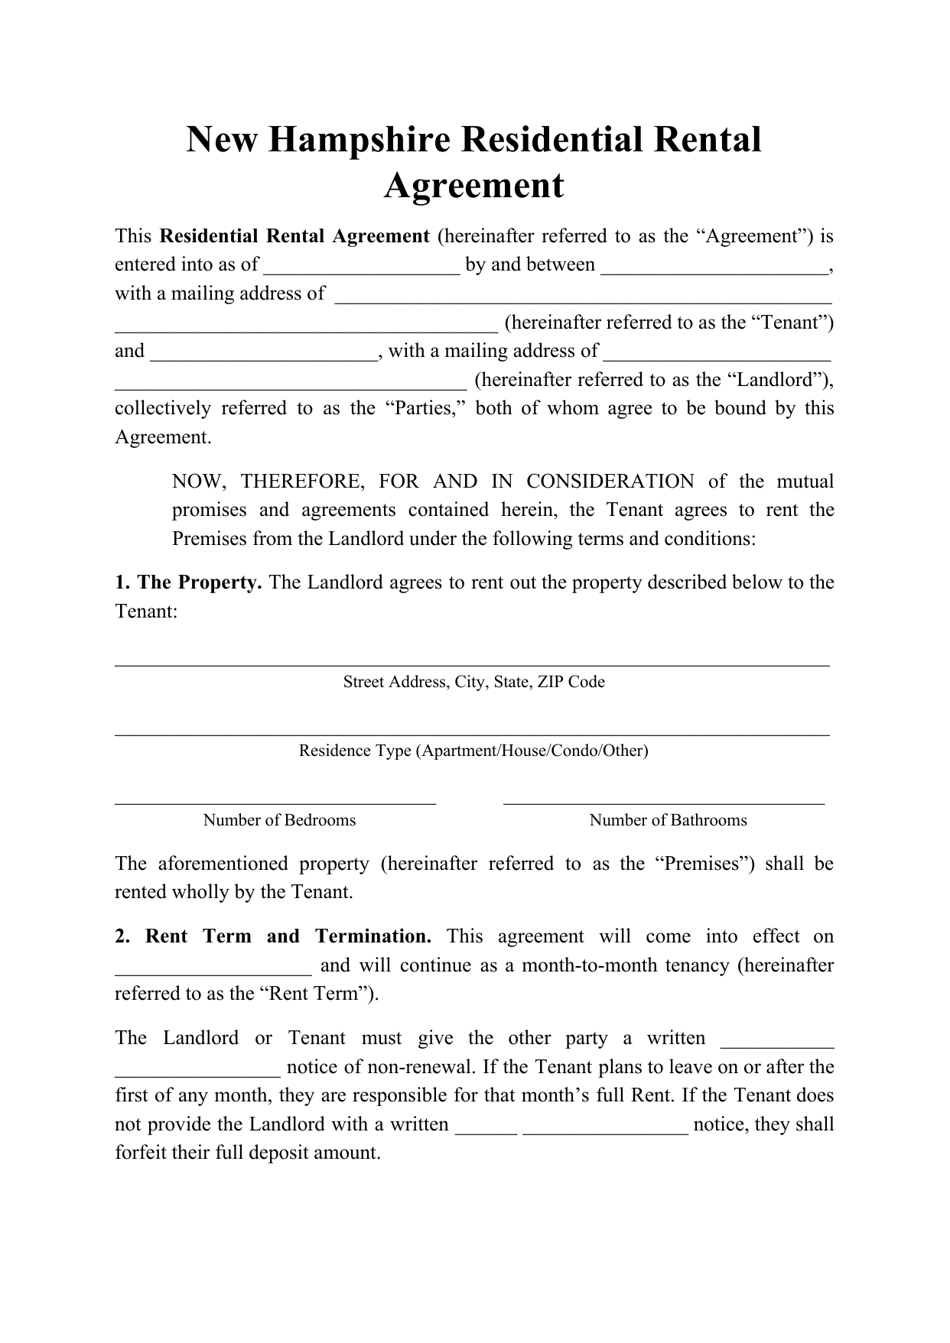 new hampshire residential rental agreement template download printable pdf templateroller